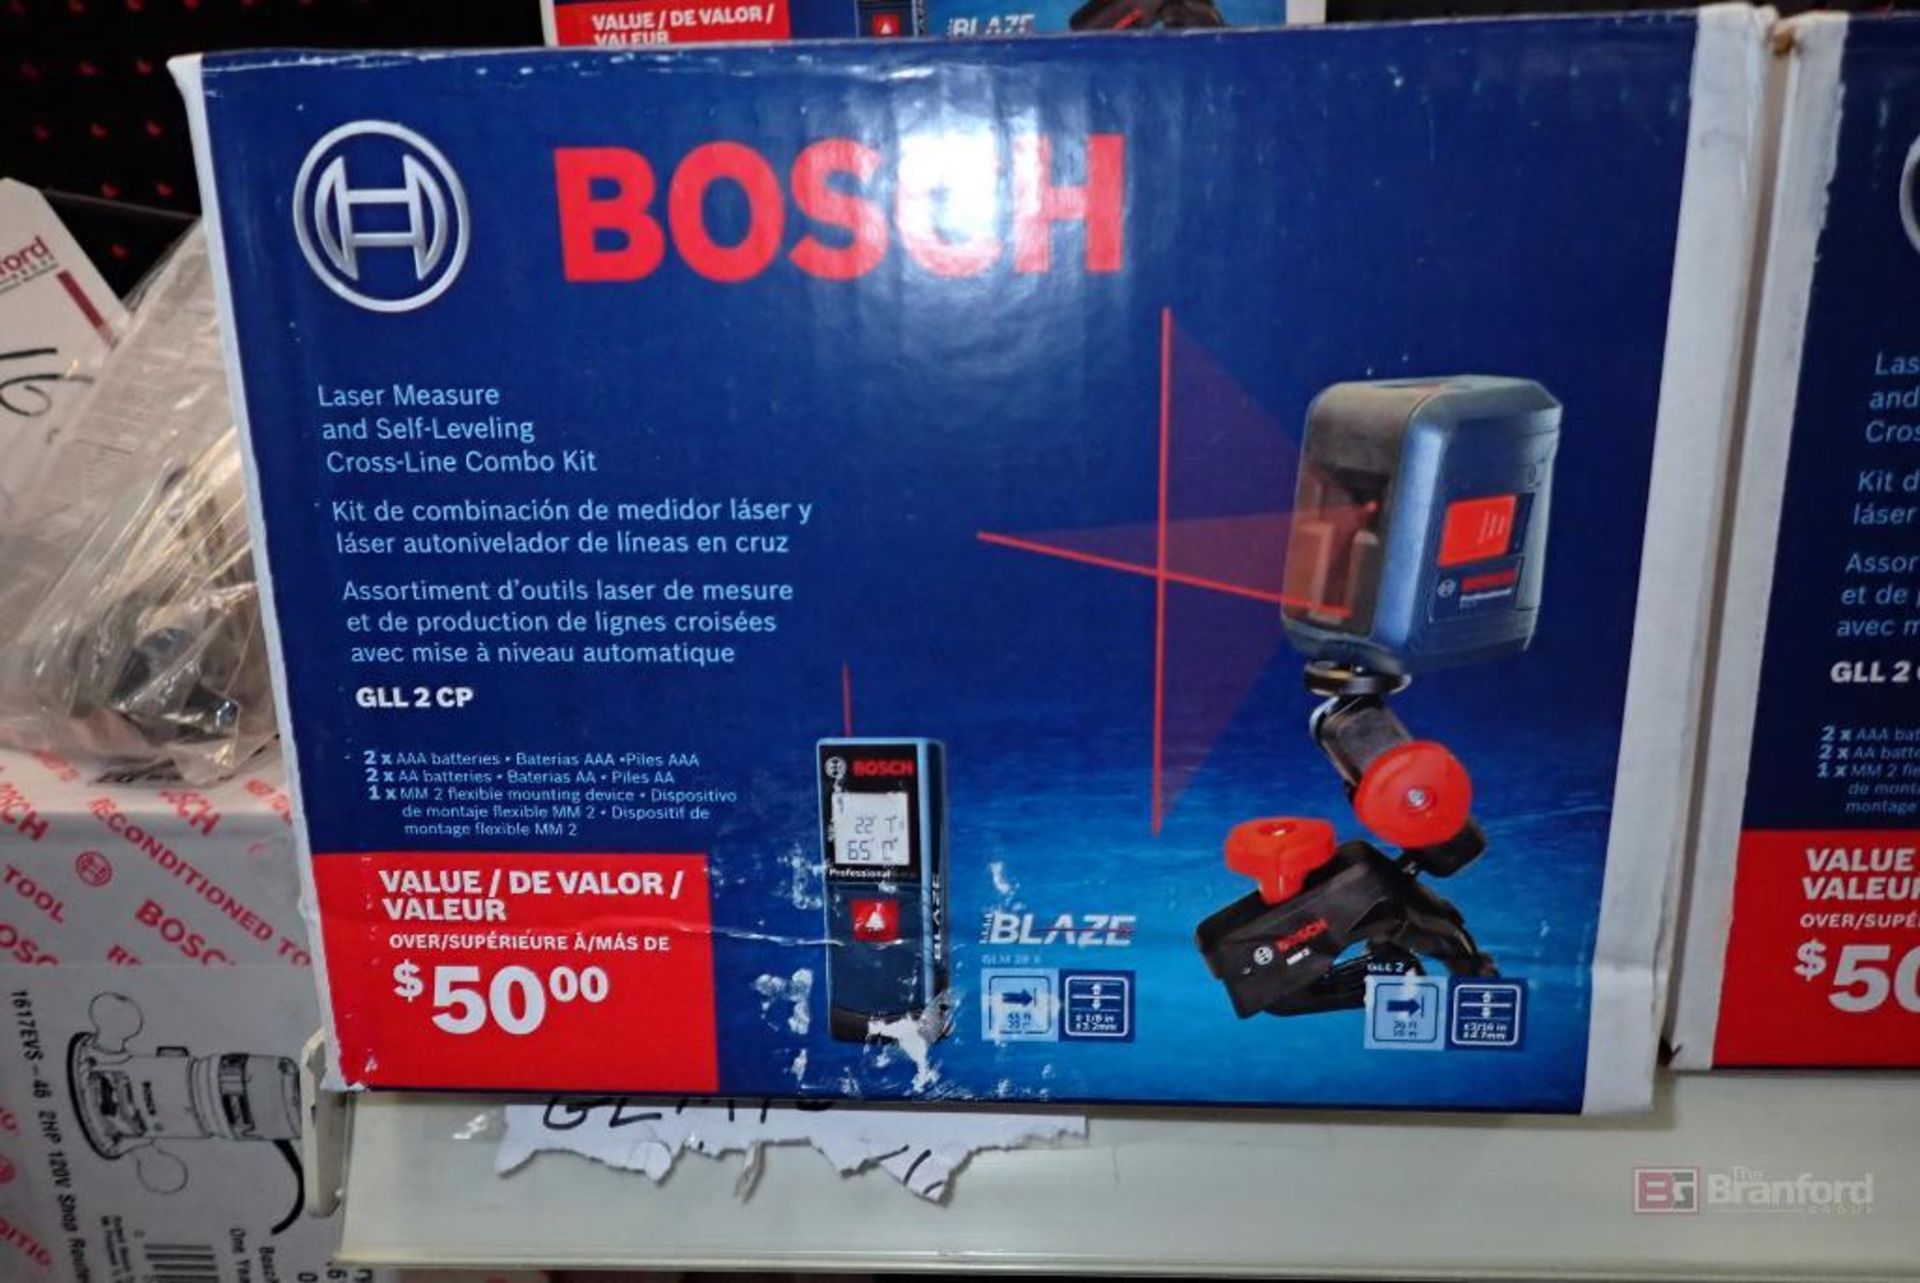 Bosch GLL 2 CP Laser Measure & Self-Leveling Cross-Line Combo Kit - Image 2 of 4